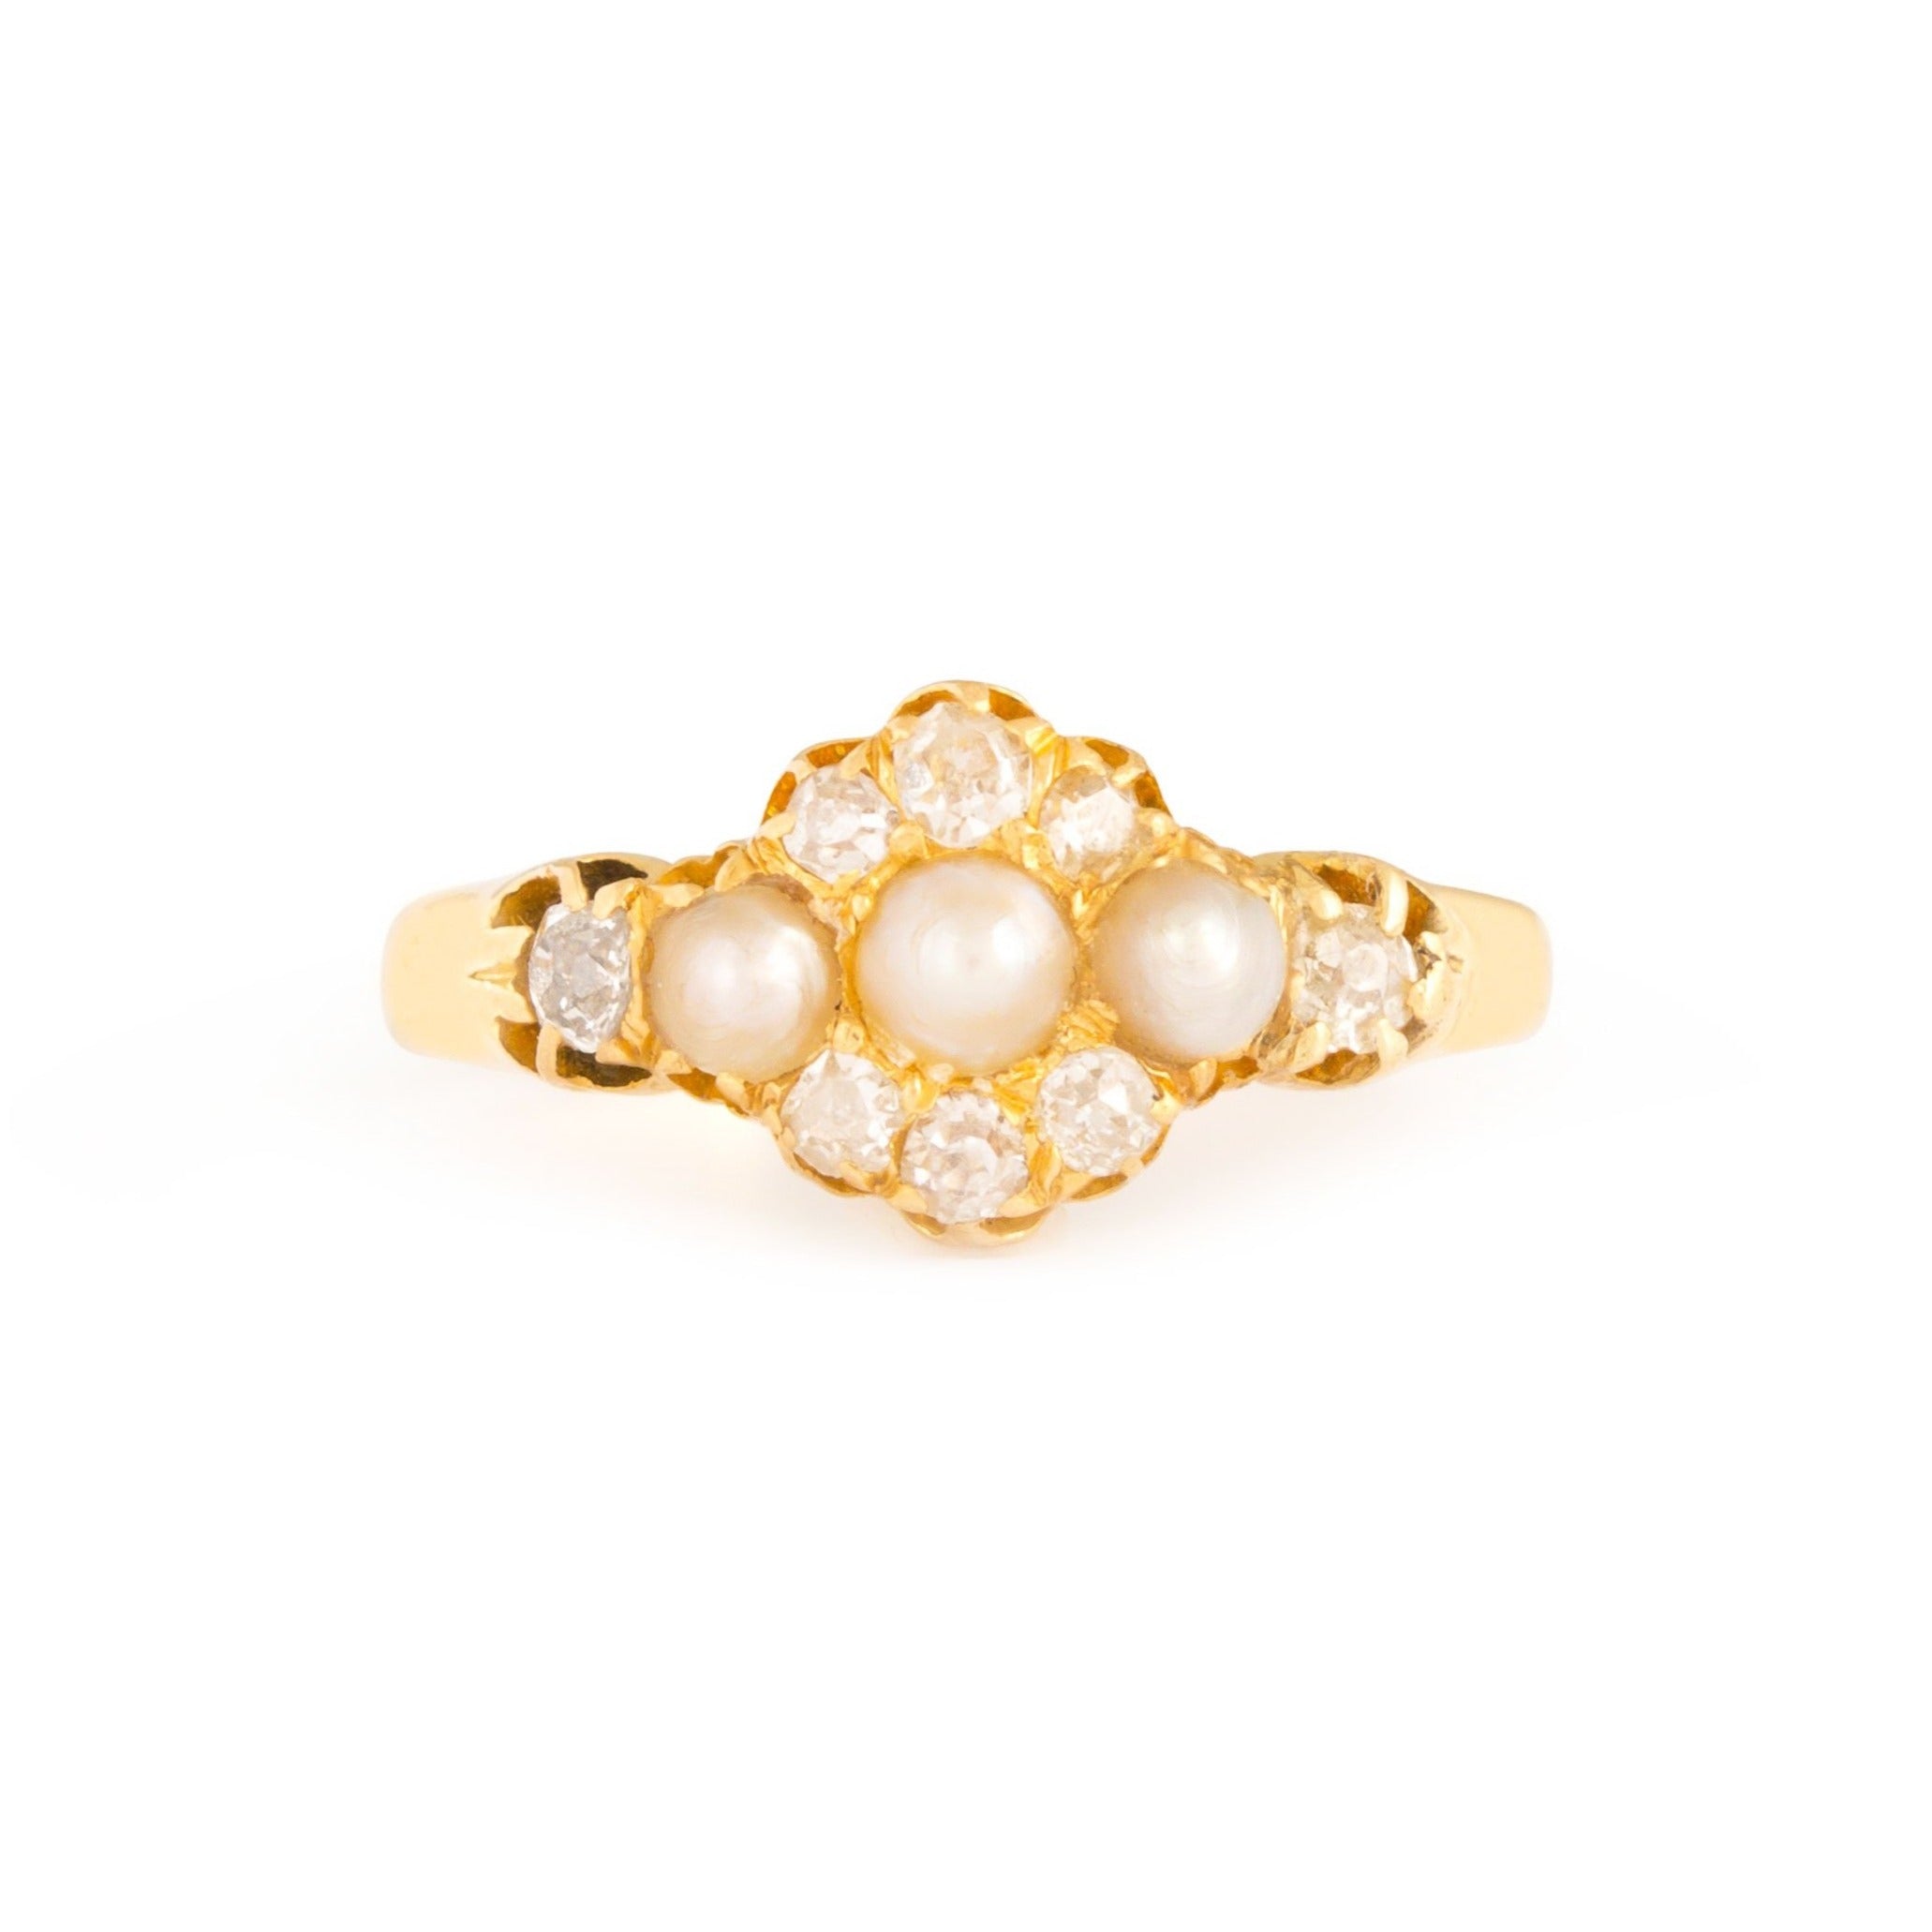 Victorian Pearl, Old Mine Cut Diamond, and 14k Gold Ring